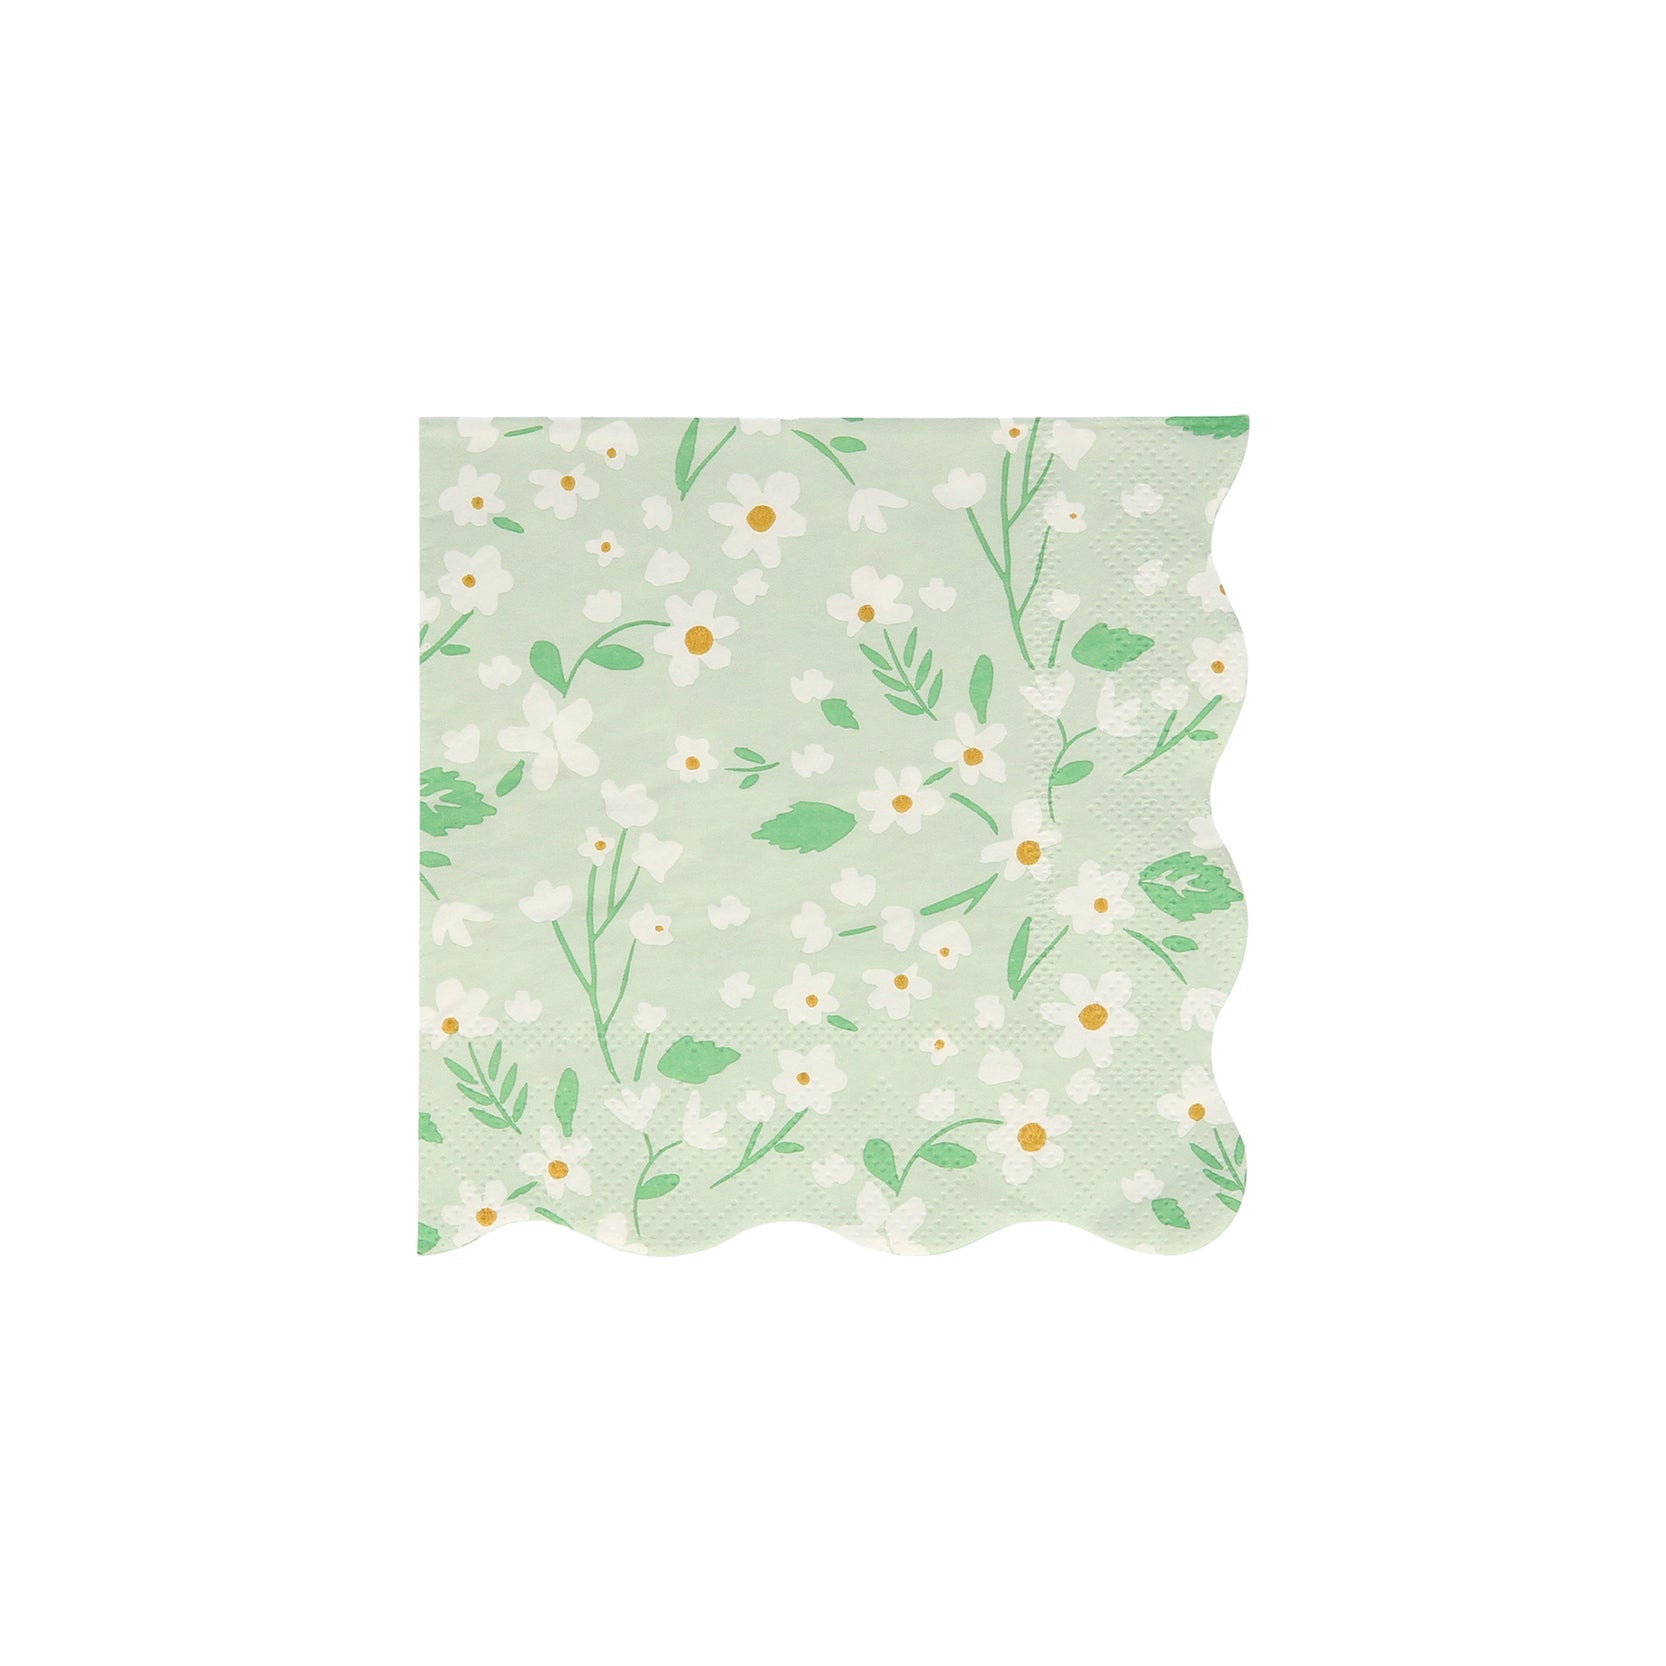 A green Ditsy Floral Napkins with a floral pattern by Meri Meri.